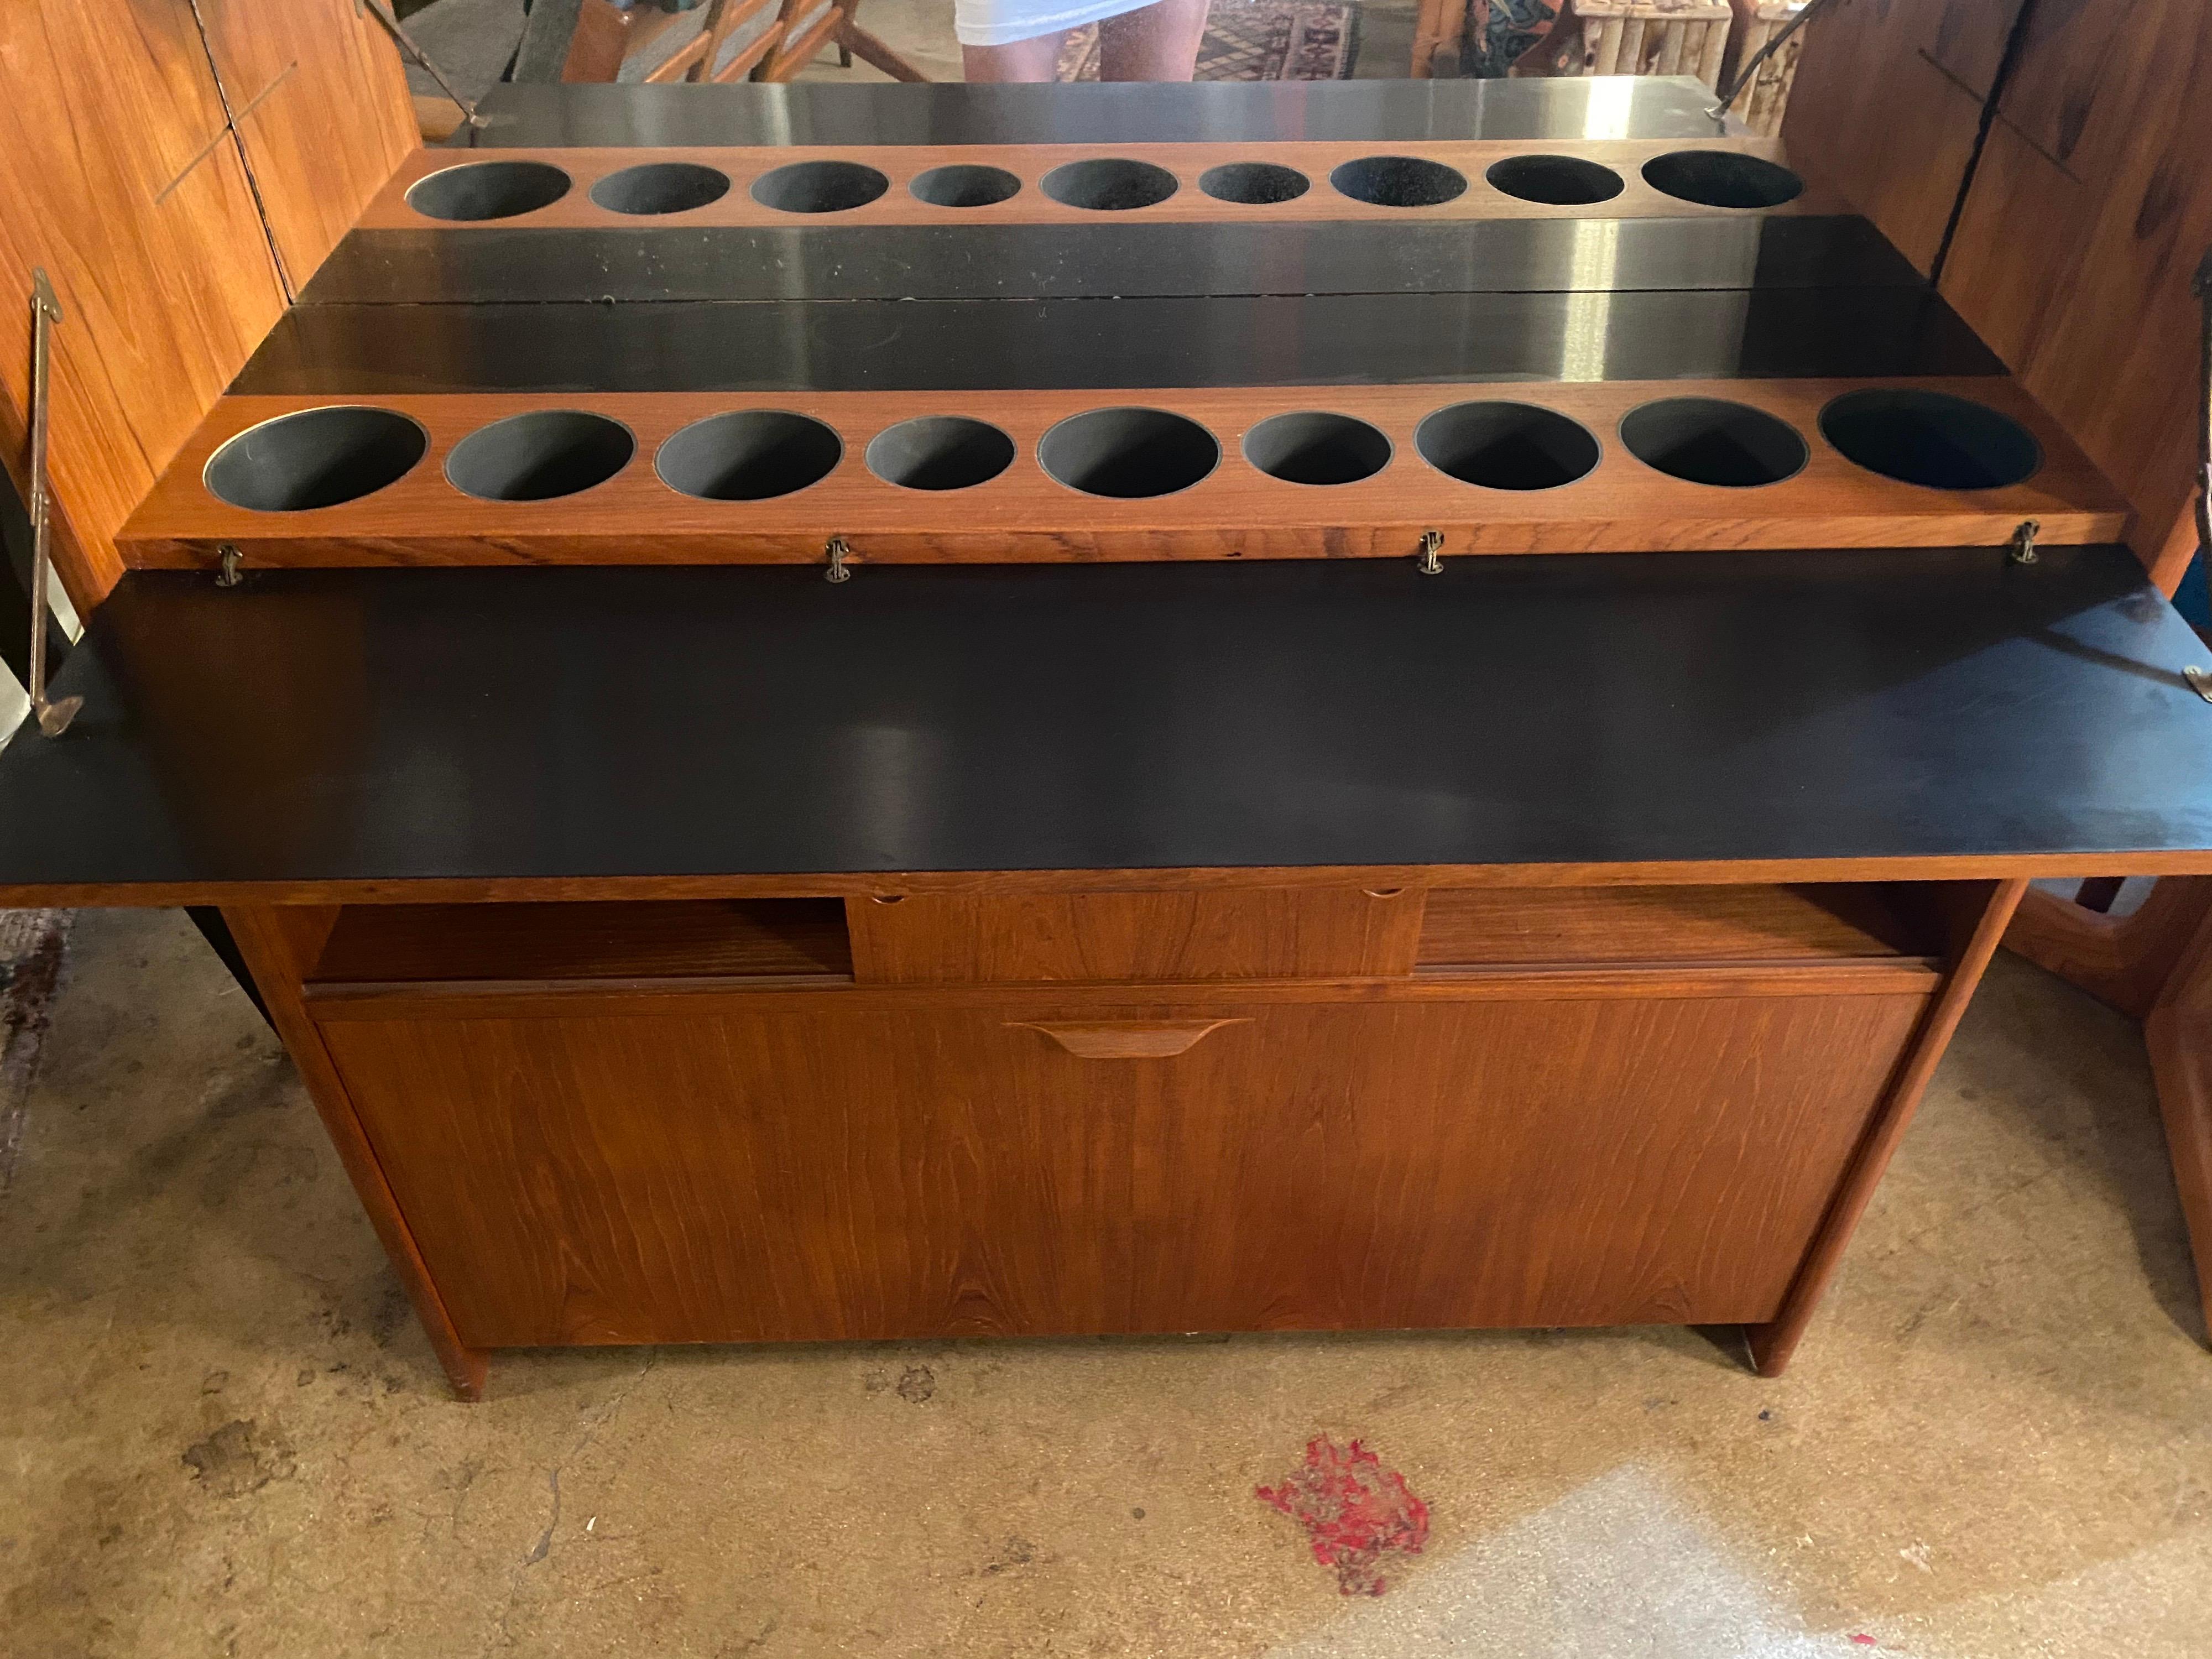 Gorgeous danish modern teak bar designed by Johannes Andersen features round inlays in the front and back along with compartments for glass and bottles. This mid-century bar is in great overall condition.